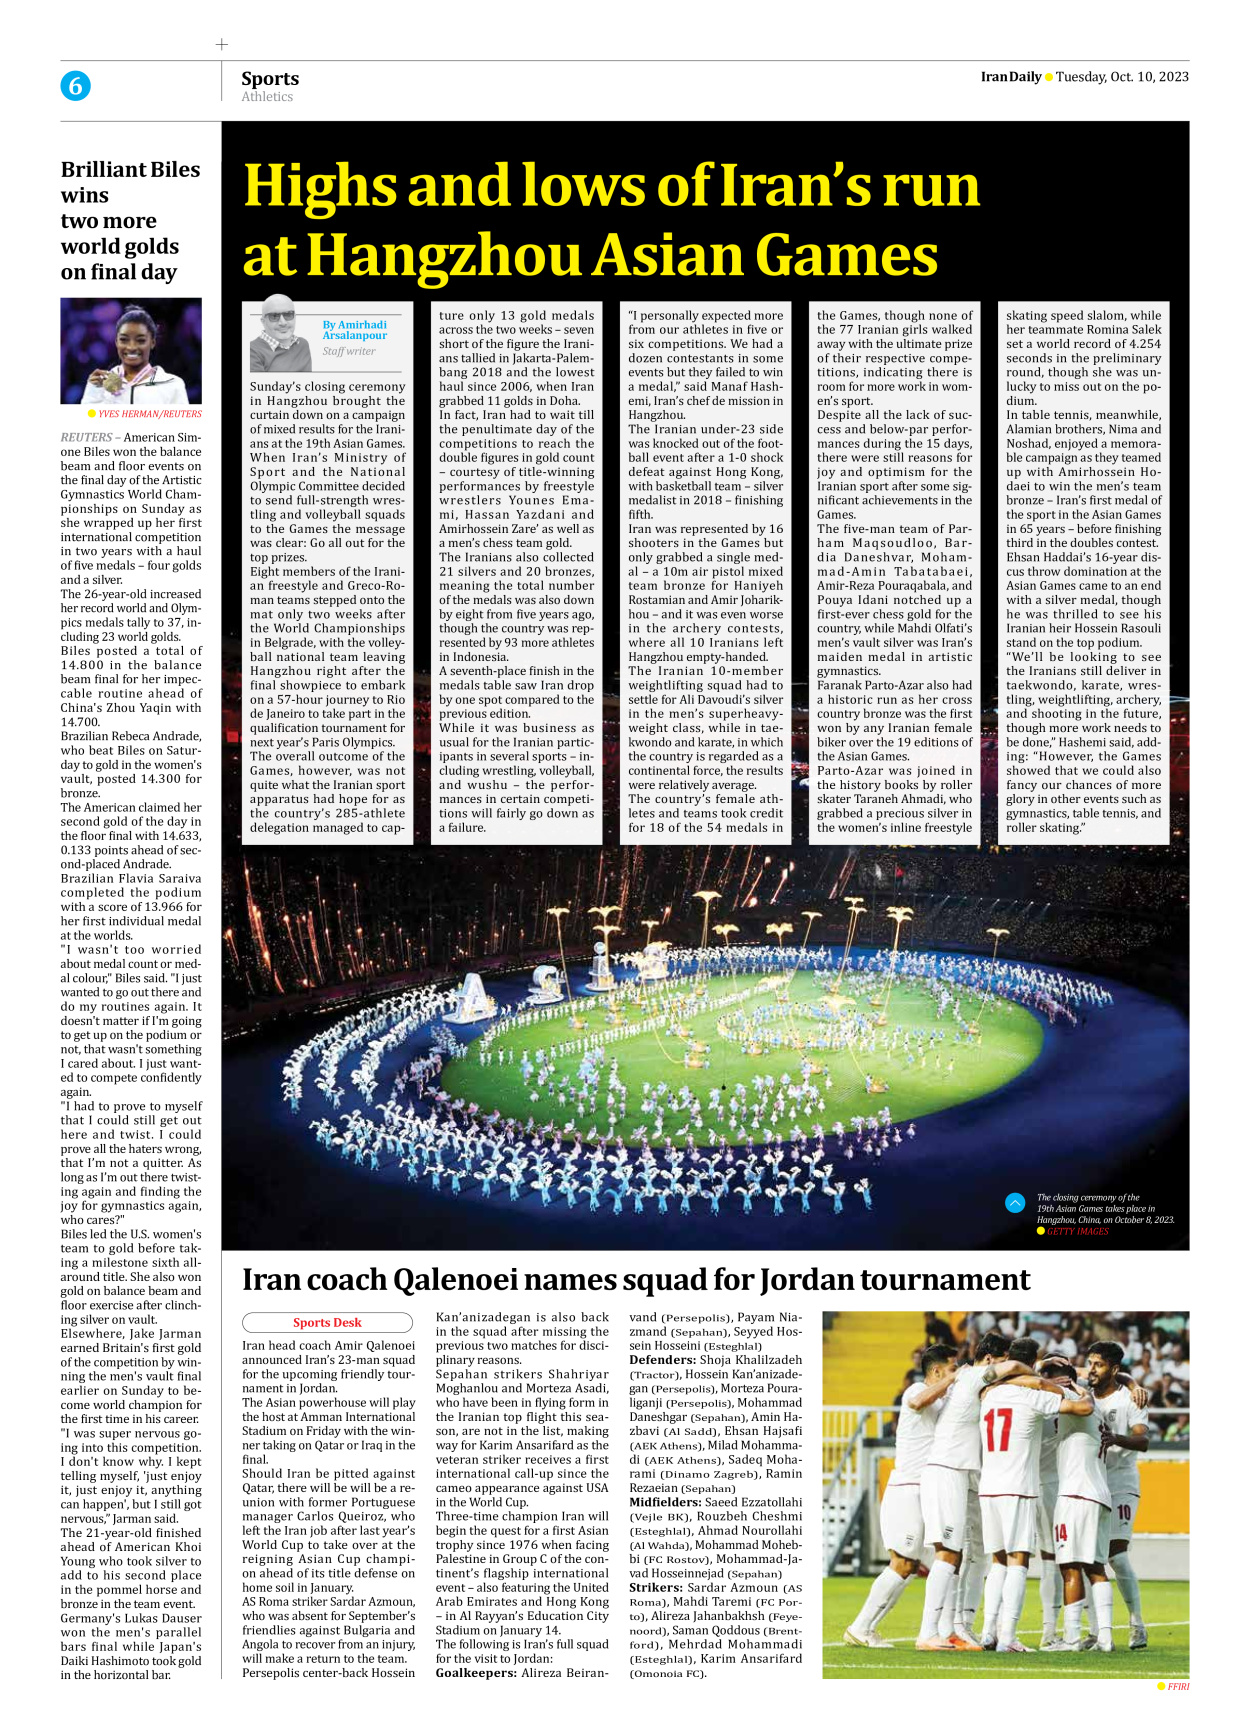 Iran Daily - Number Seven Thousand Four Hundred and Four - 10 October 2023 - Page 6